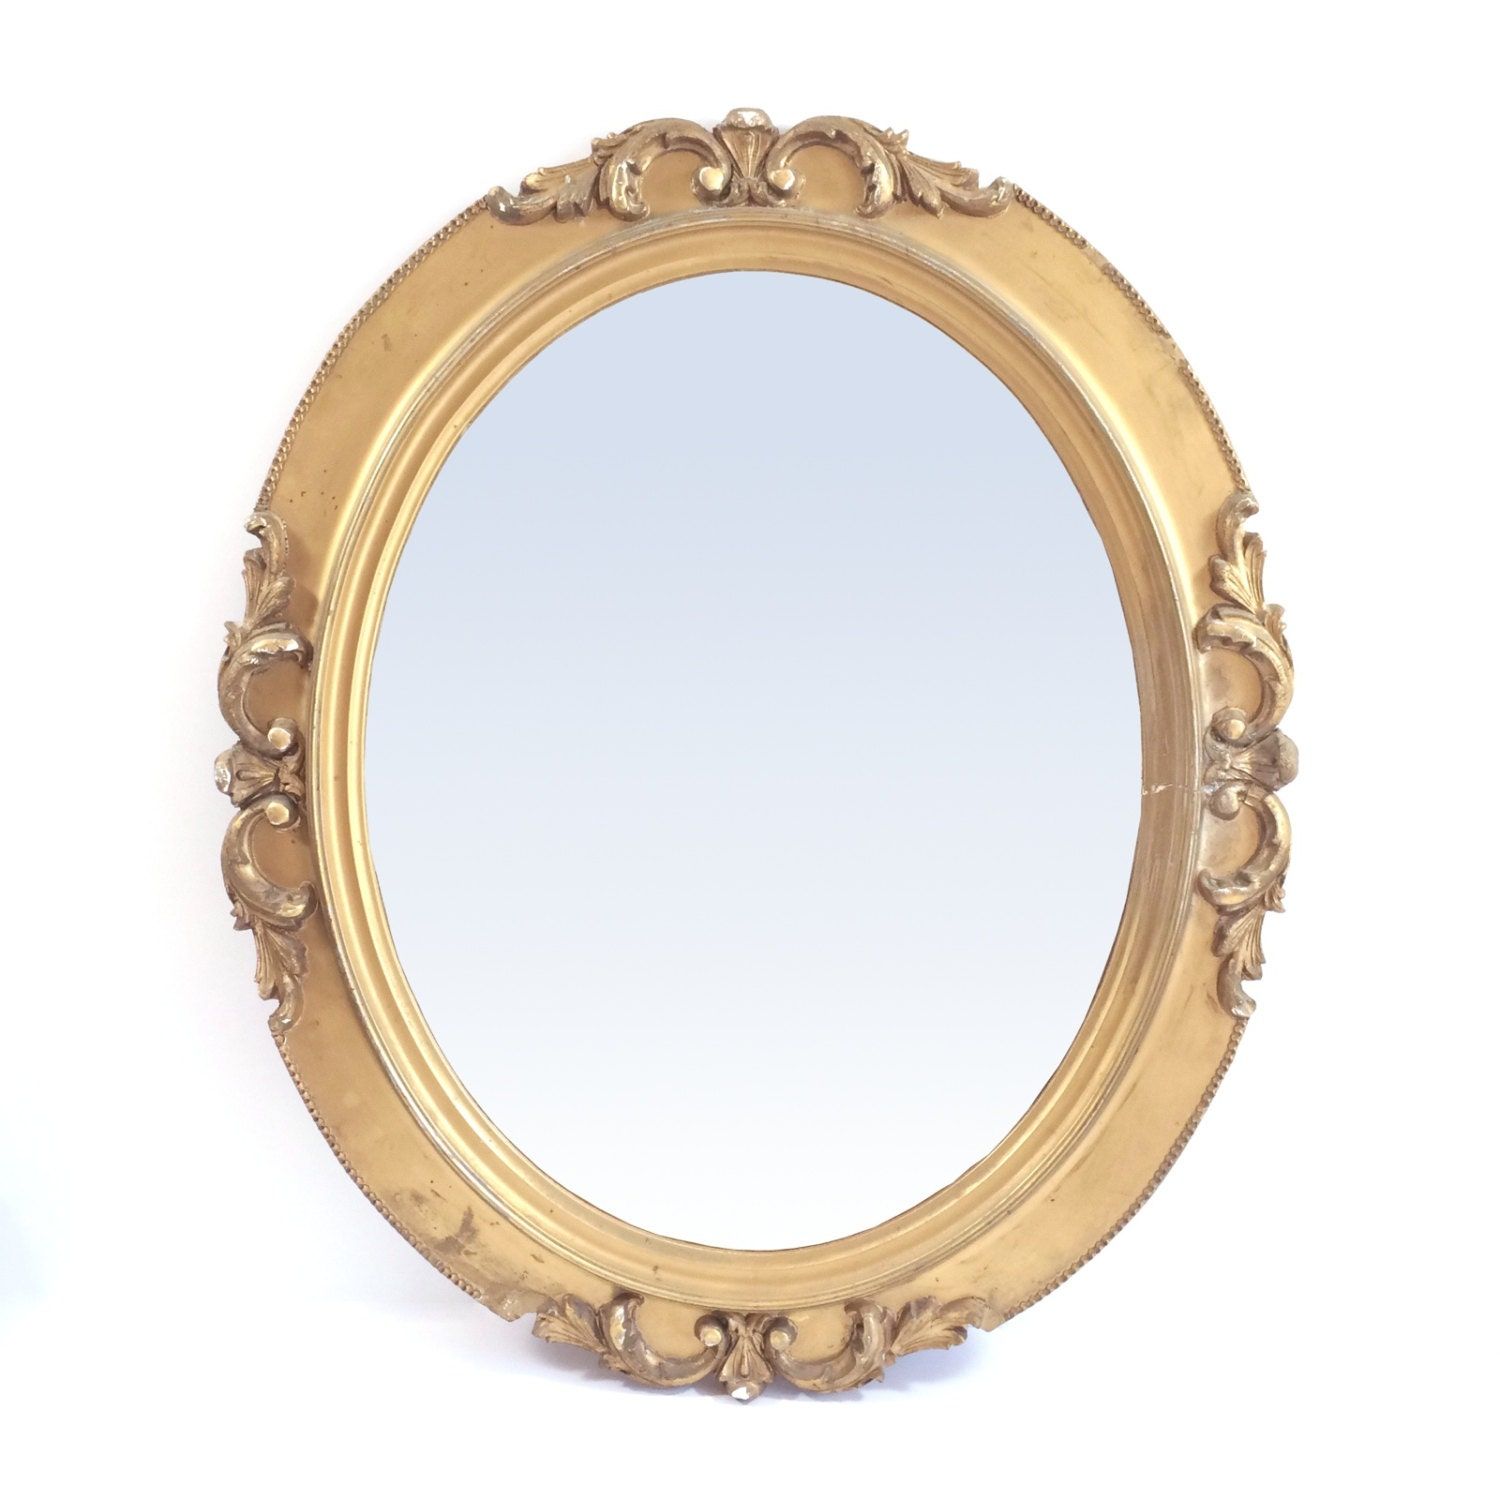 Vintage Gold Gilt Oval Wall Mirror In Wood Frame 25 By Throughout Wooden Oval Wall Mirrors (View 1 of 15)